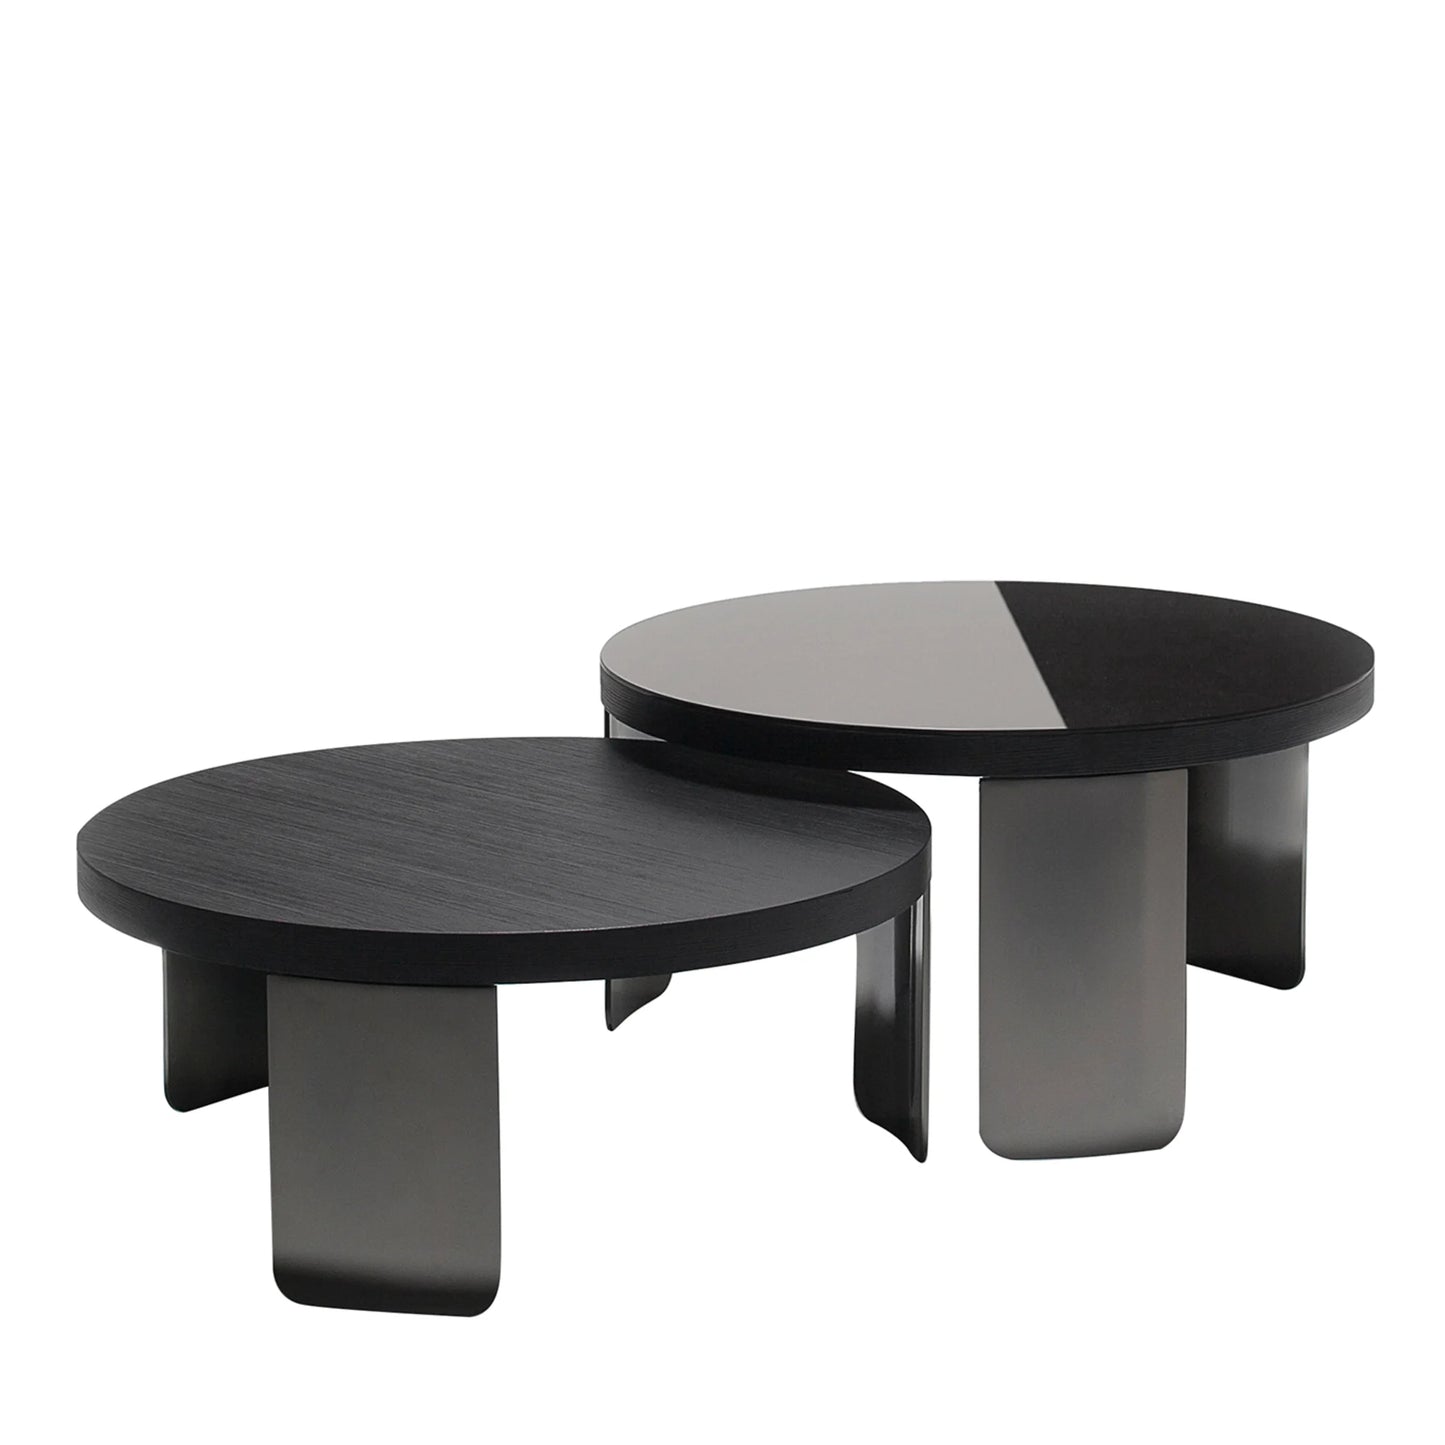 Vibieffe POINT SET OF 2 ROUND COFFEE TABLES $3,890.00